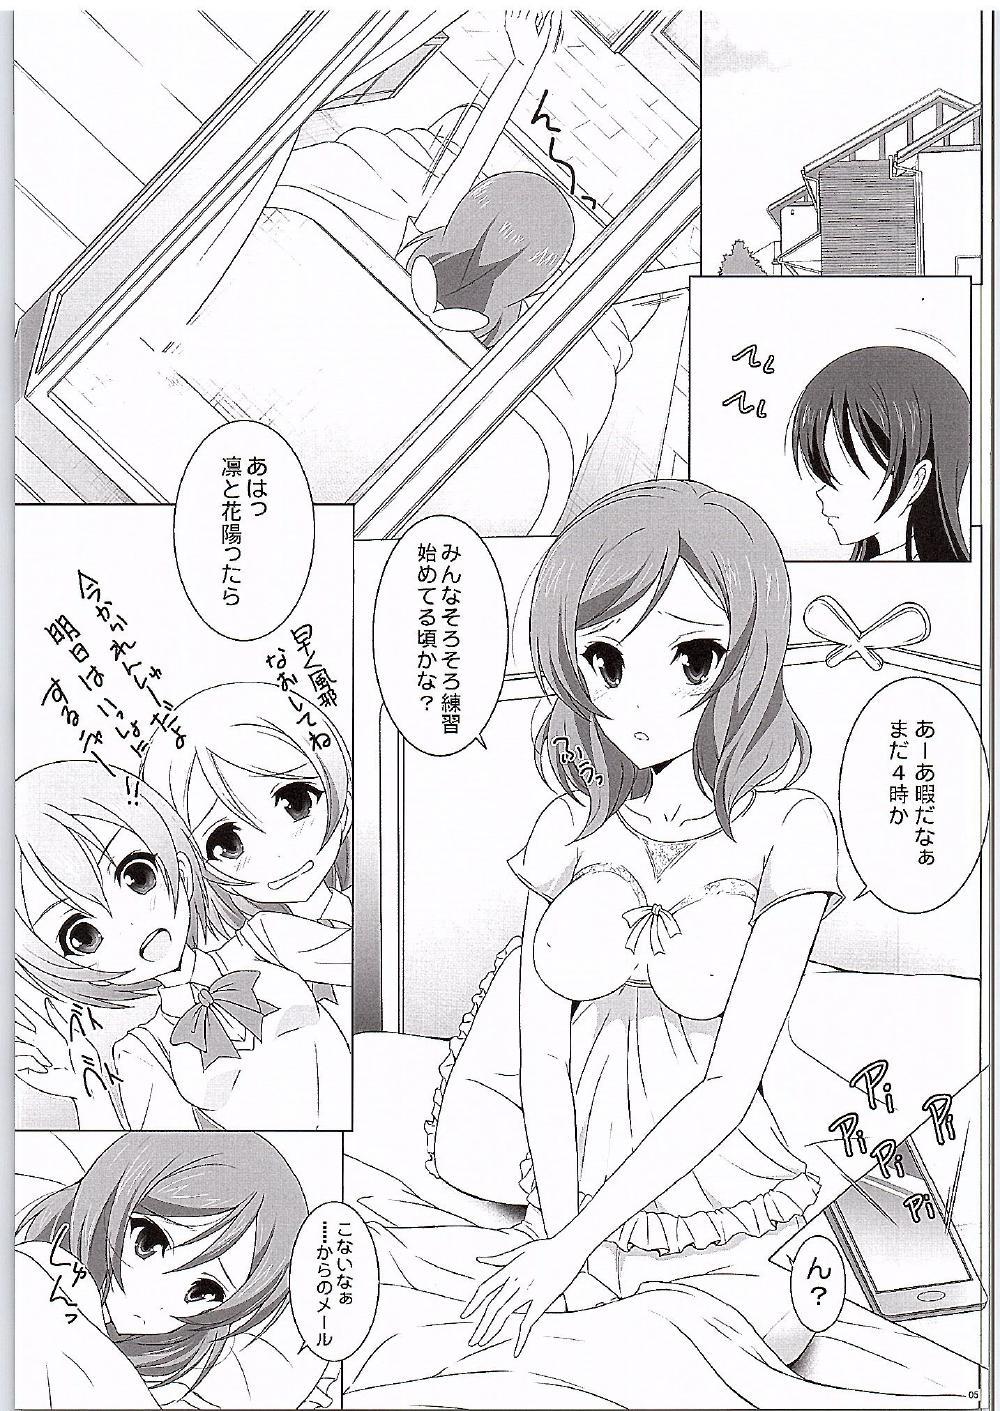 Pussyfucking UmiMaki Roll - Love live Teen - Page 4